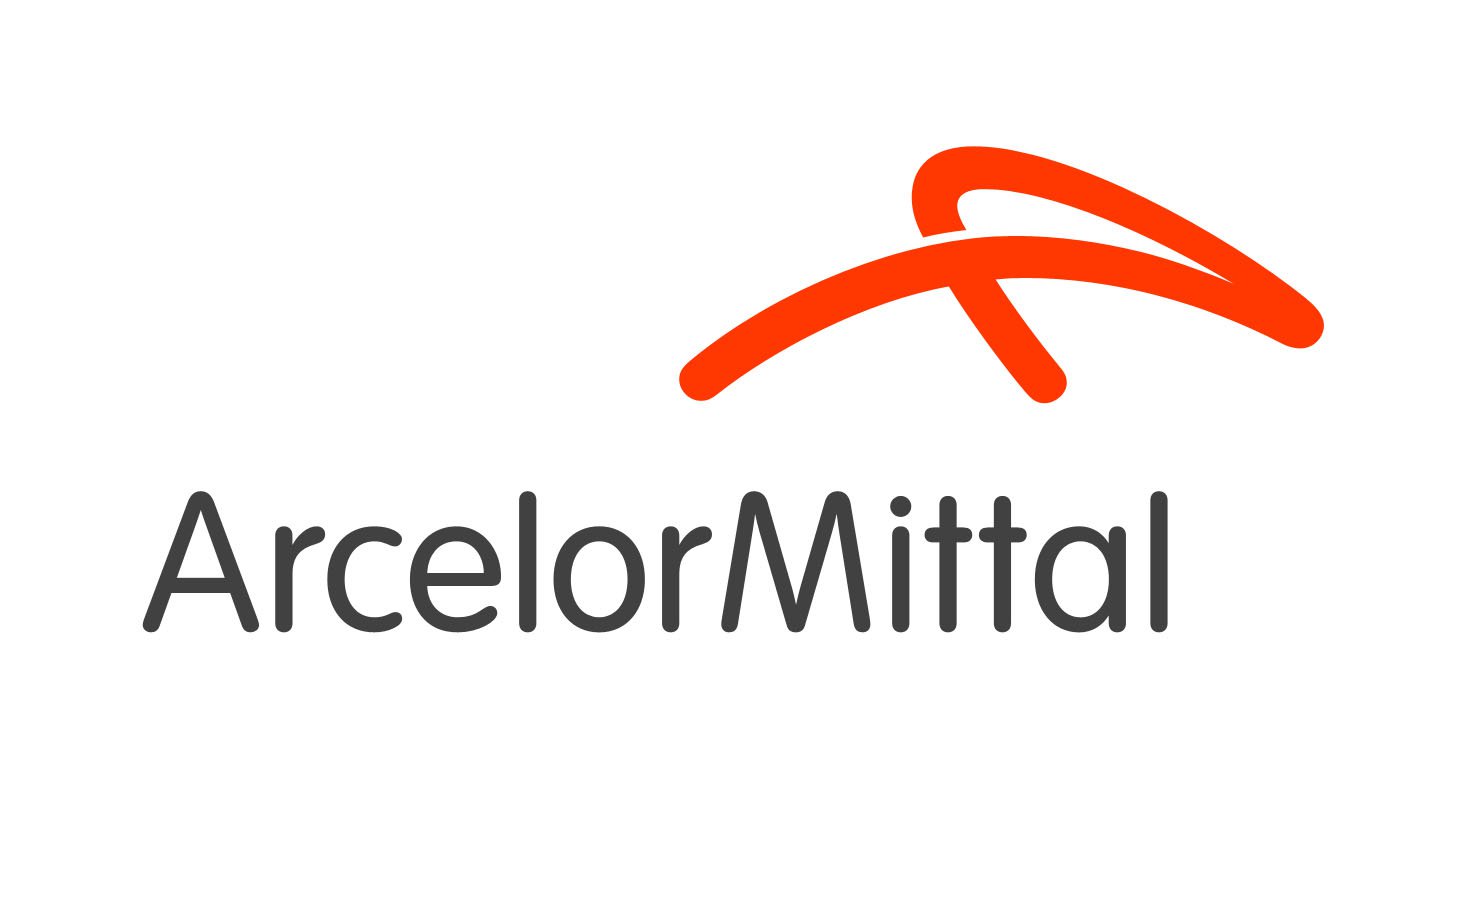 ArcelorMittal distribute food items to several communities in Nimba County